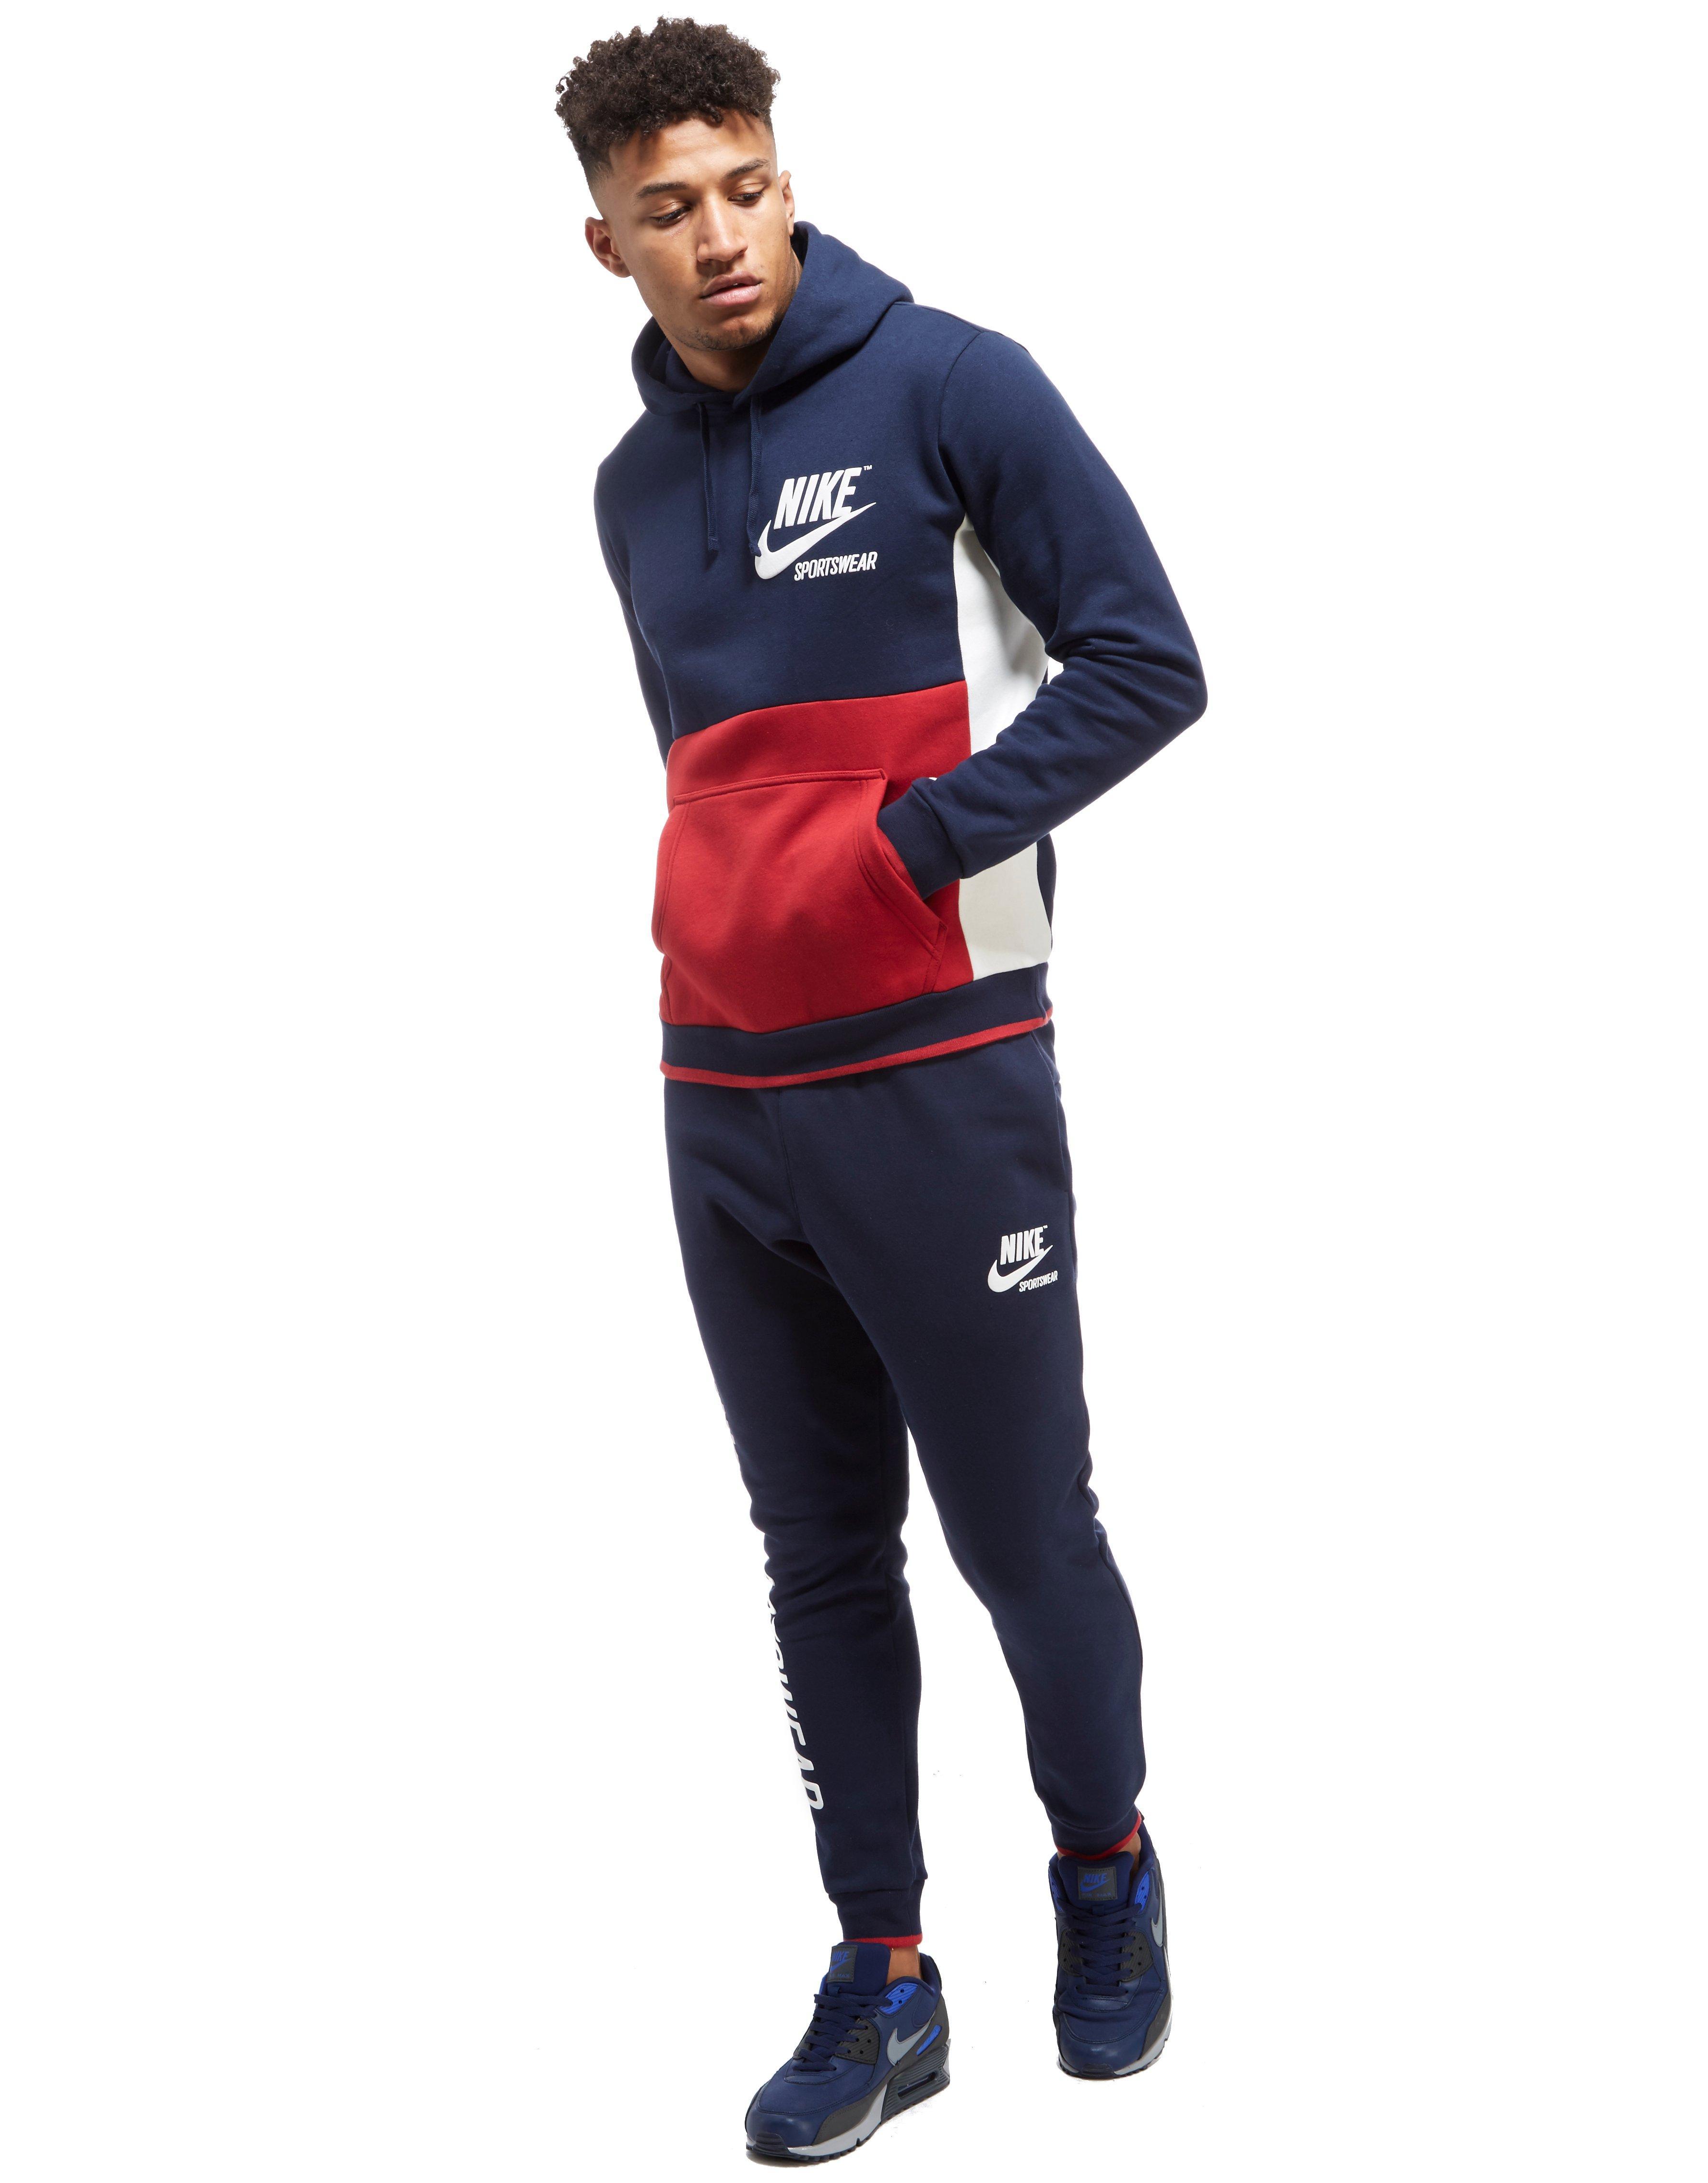 Nike Cotton Archive Overhead Hoody in Navy/Red (Blue) for Men - Lyst